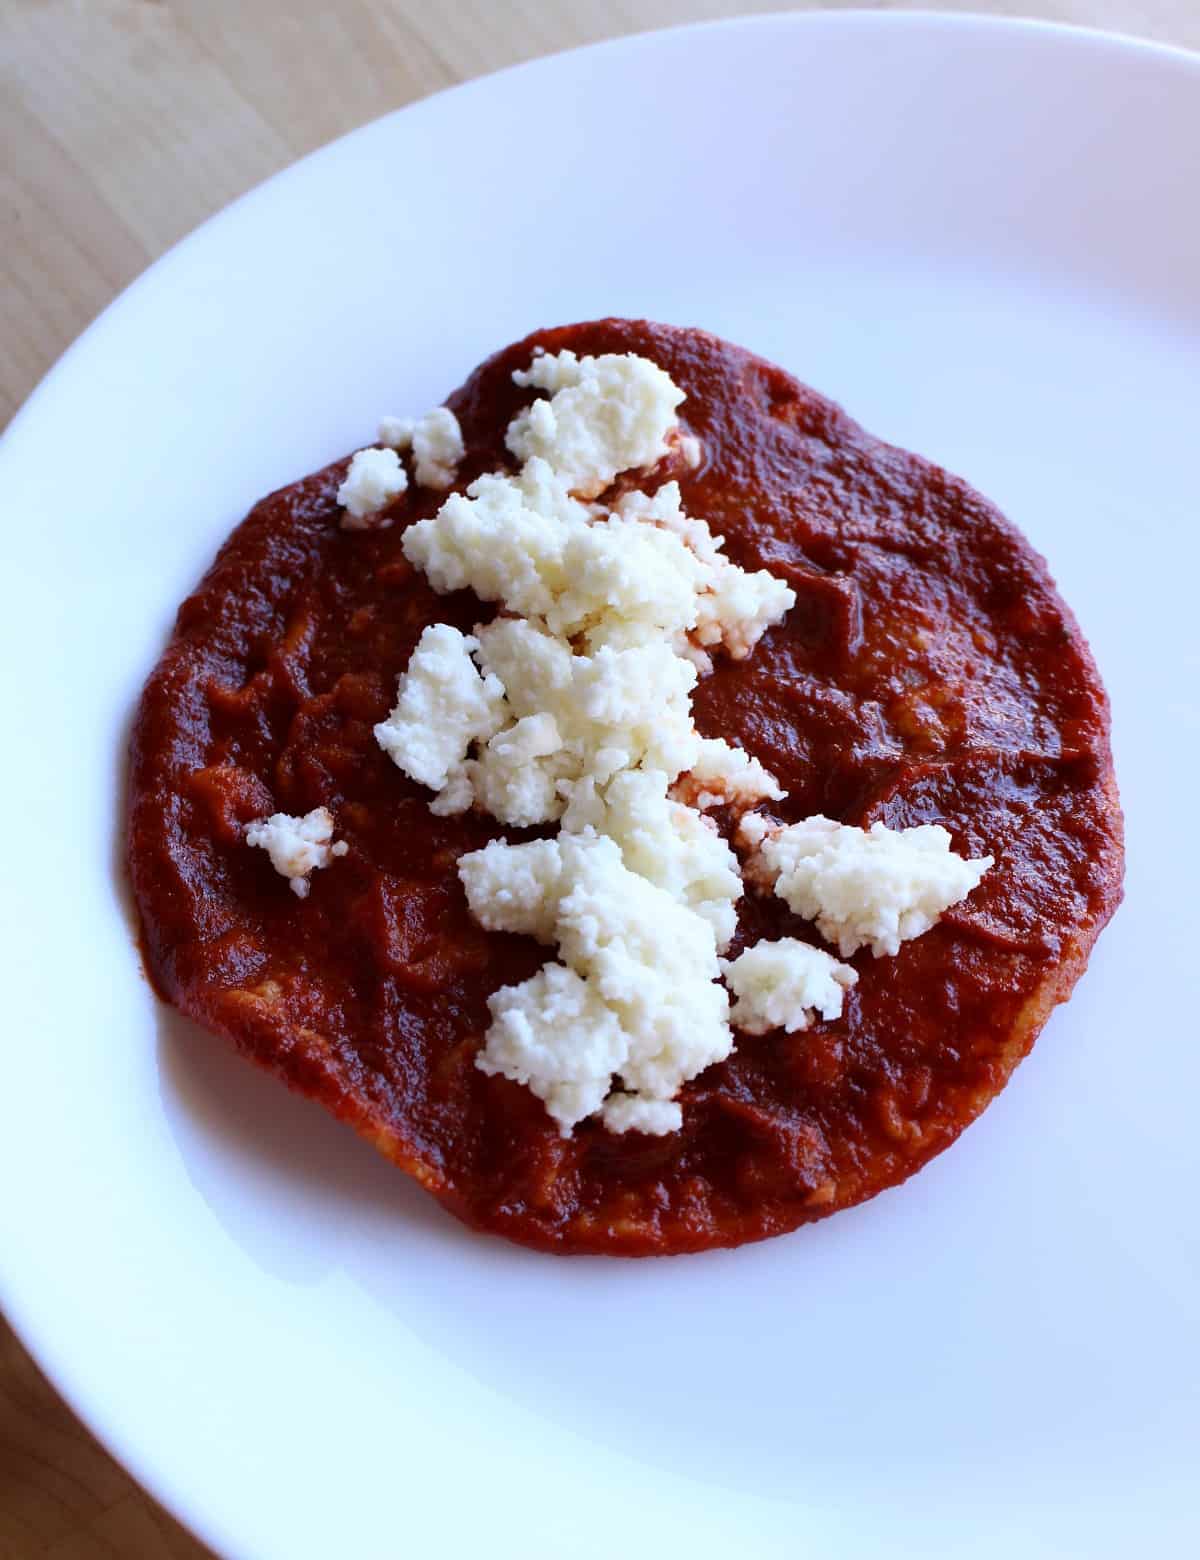 A tortilla that is covered with red sauce and crumbled cheese in the center.